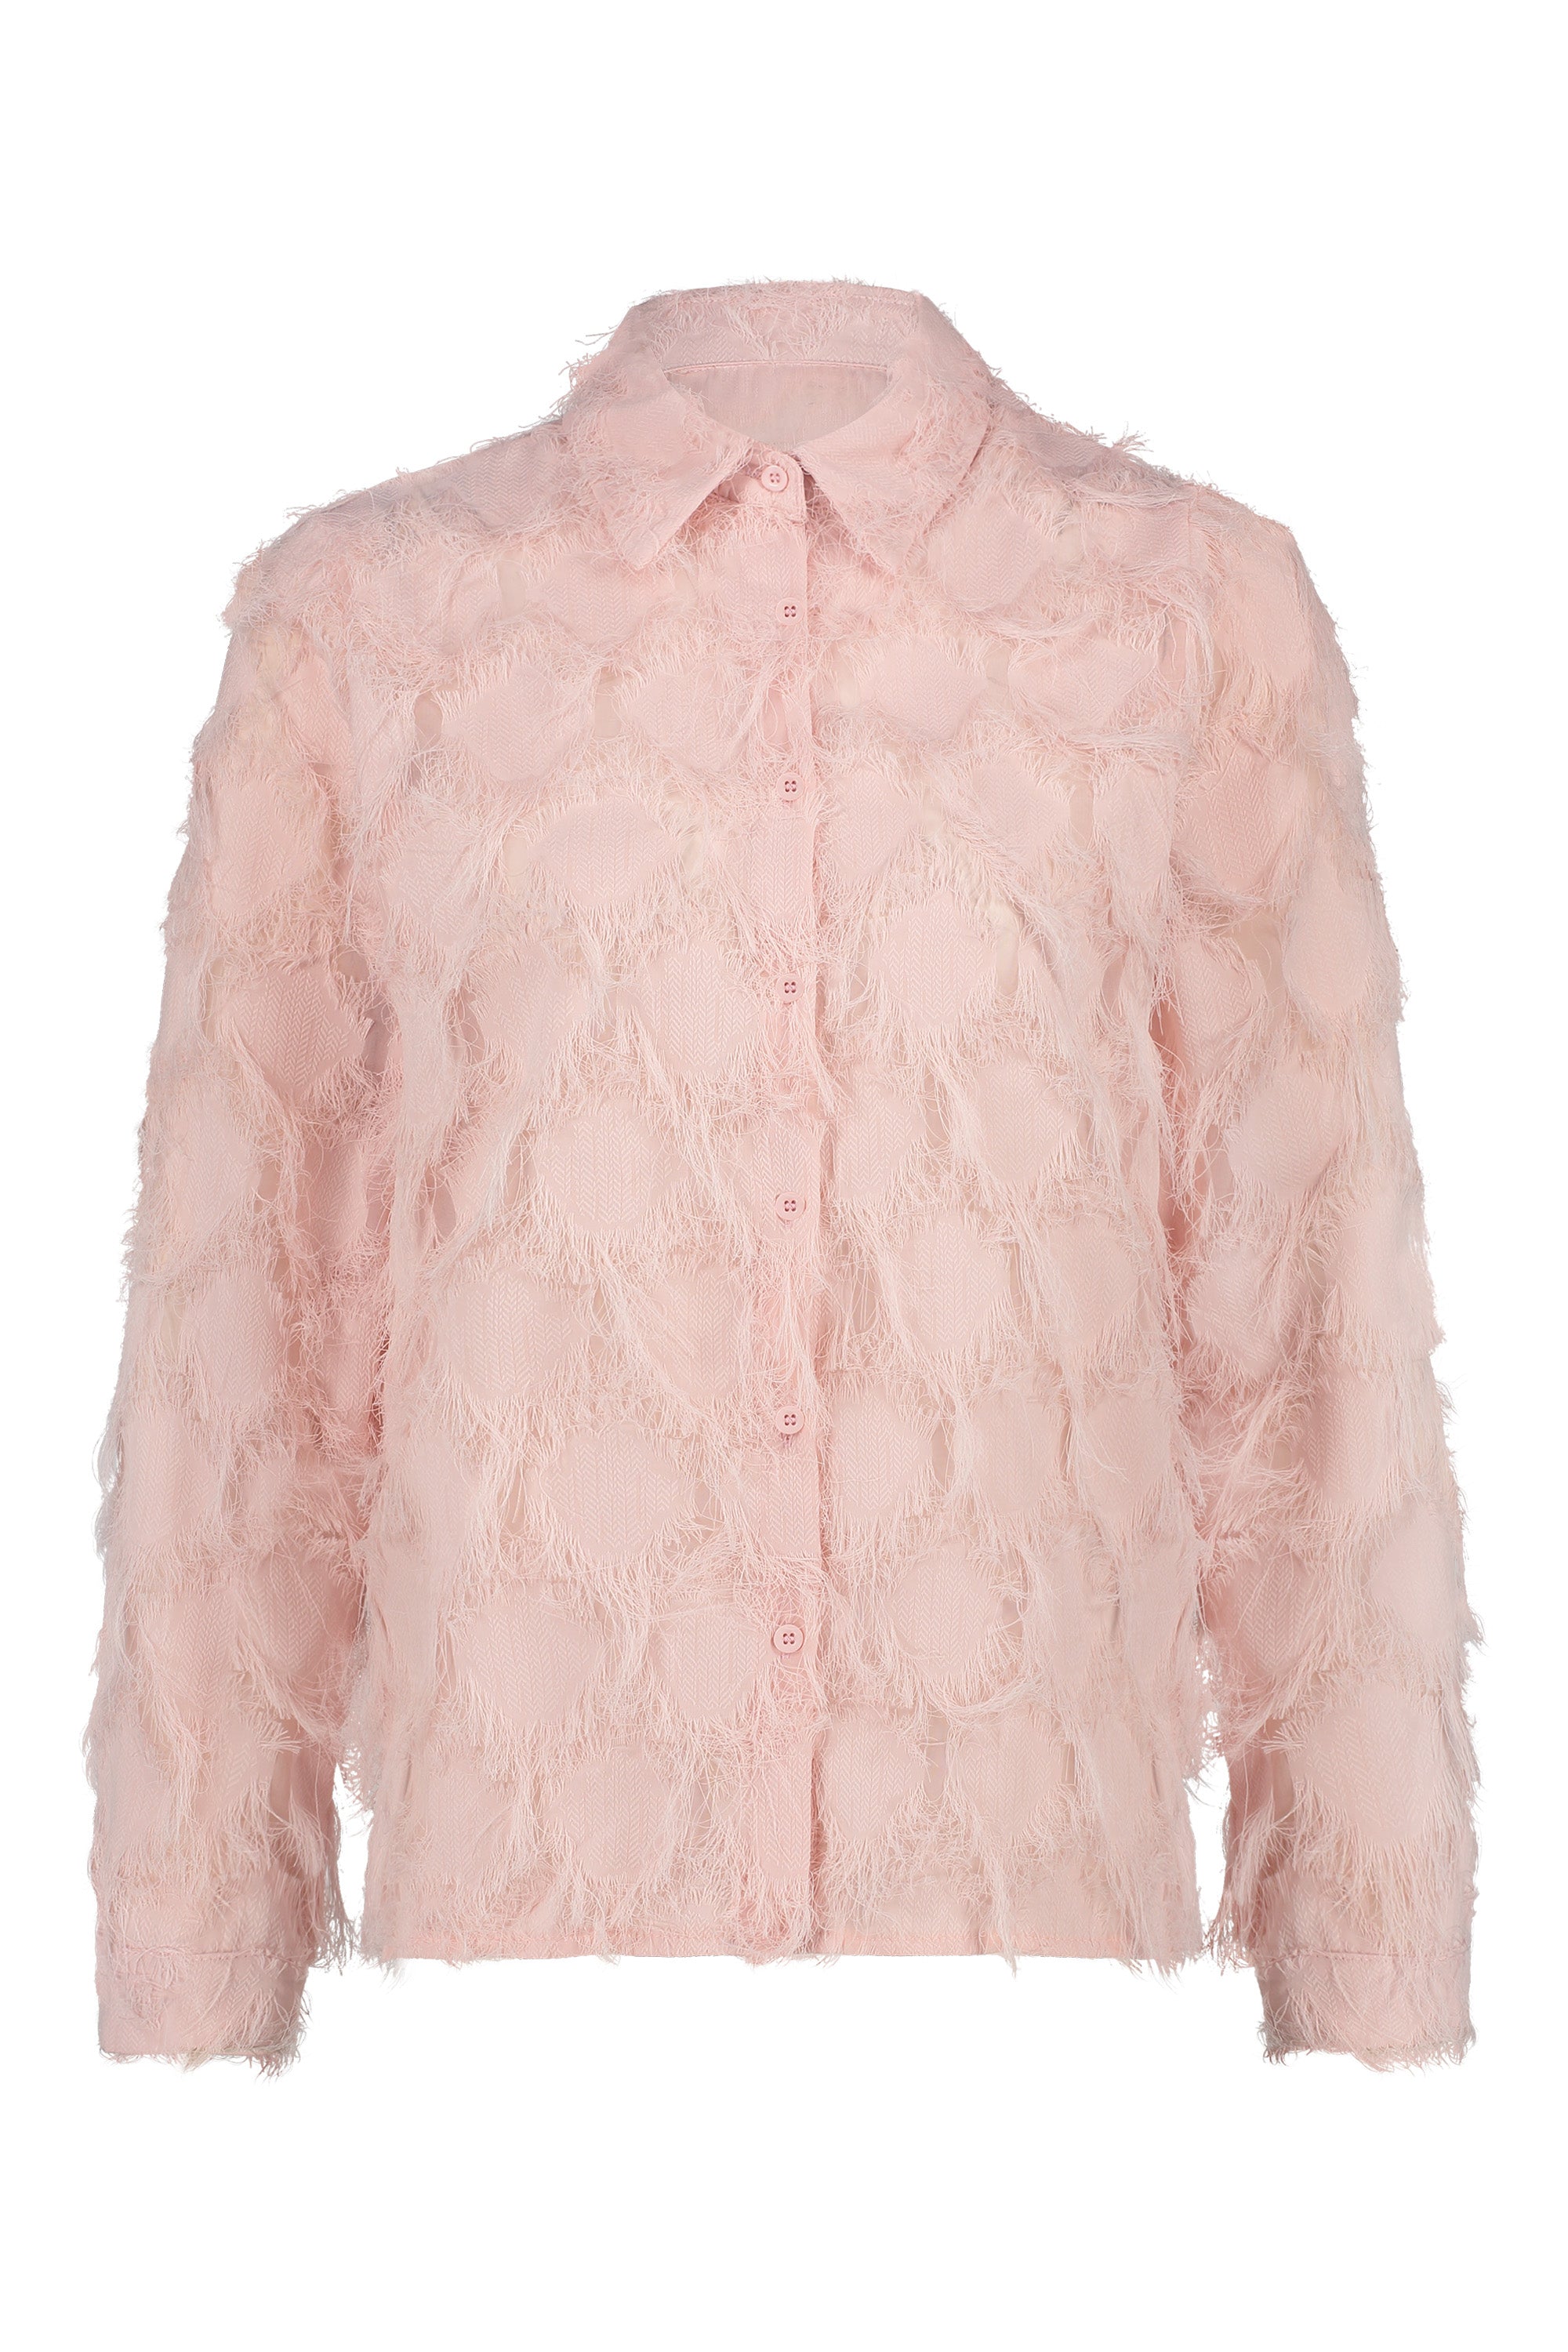 Feather blouse pink